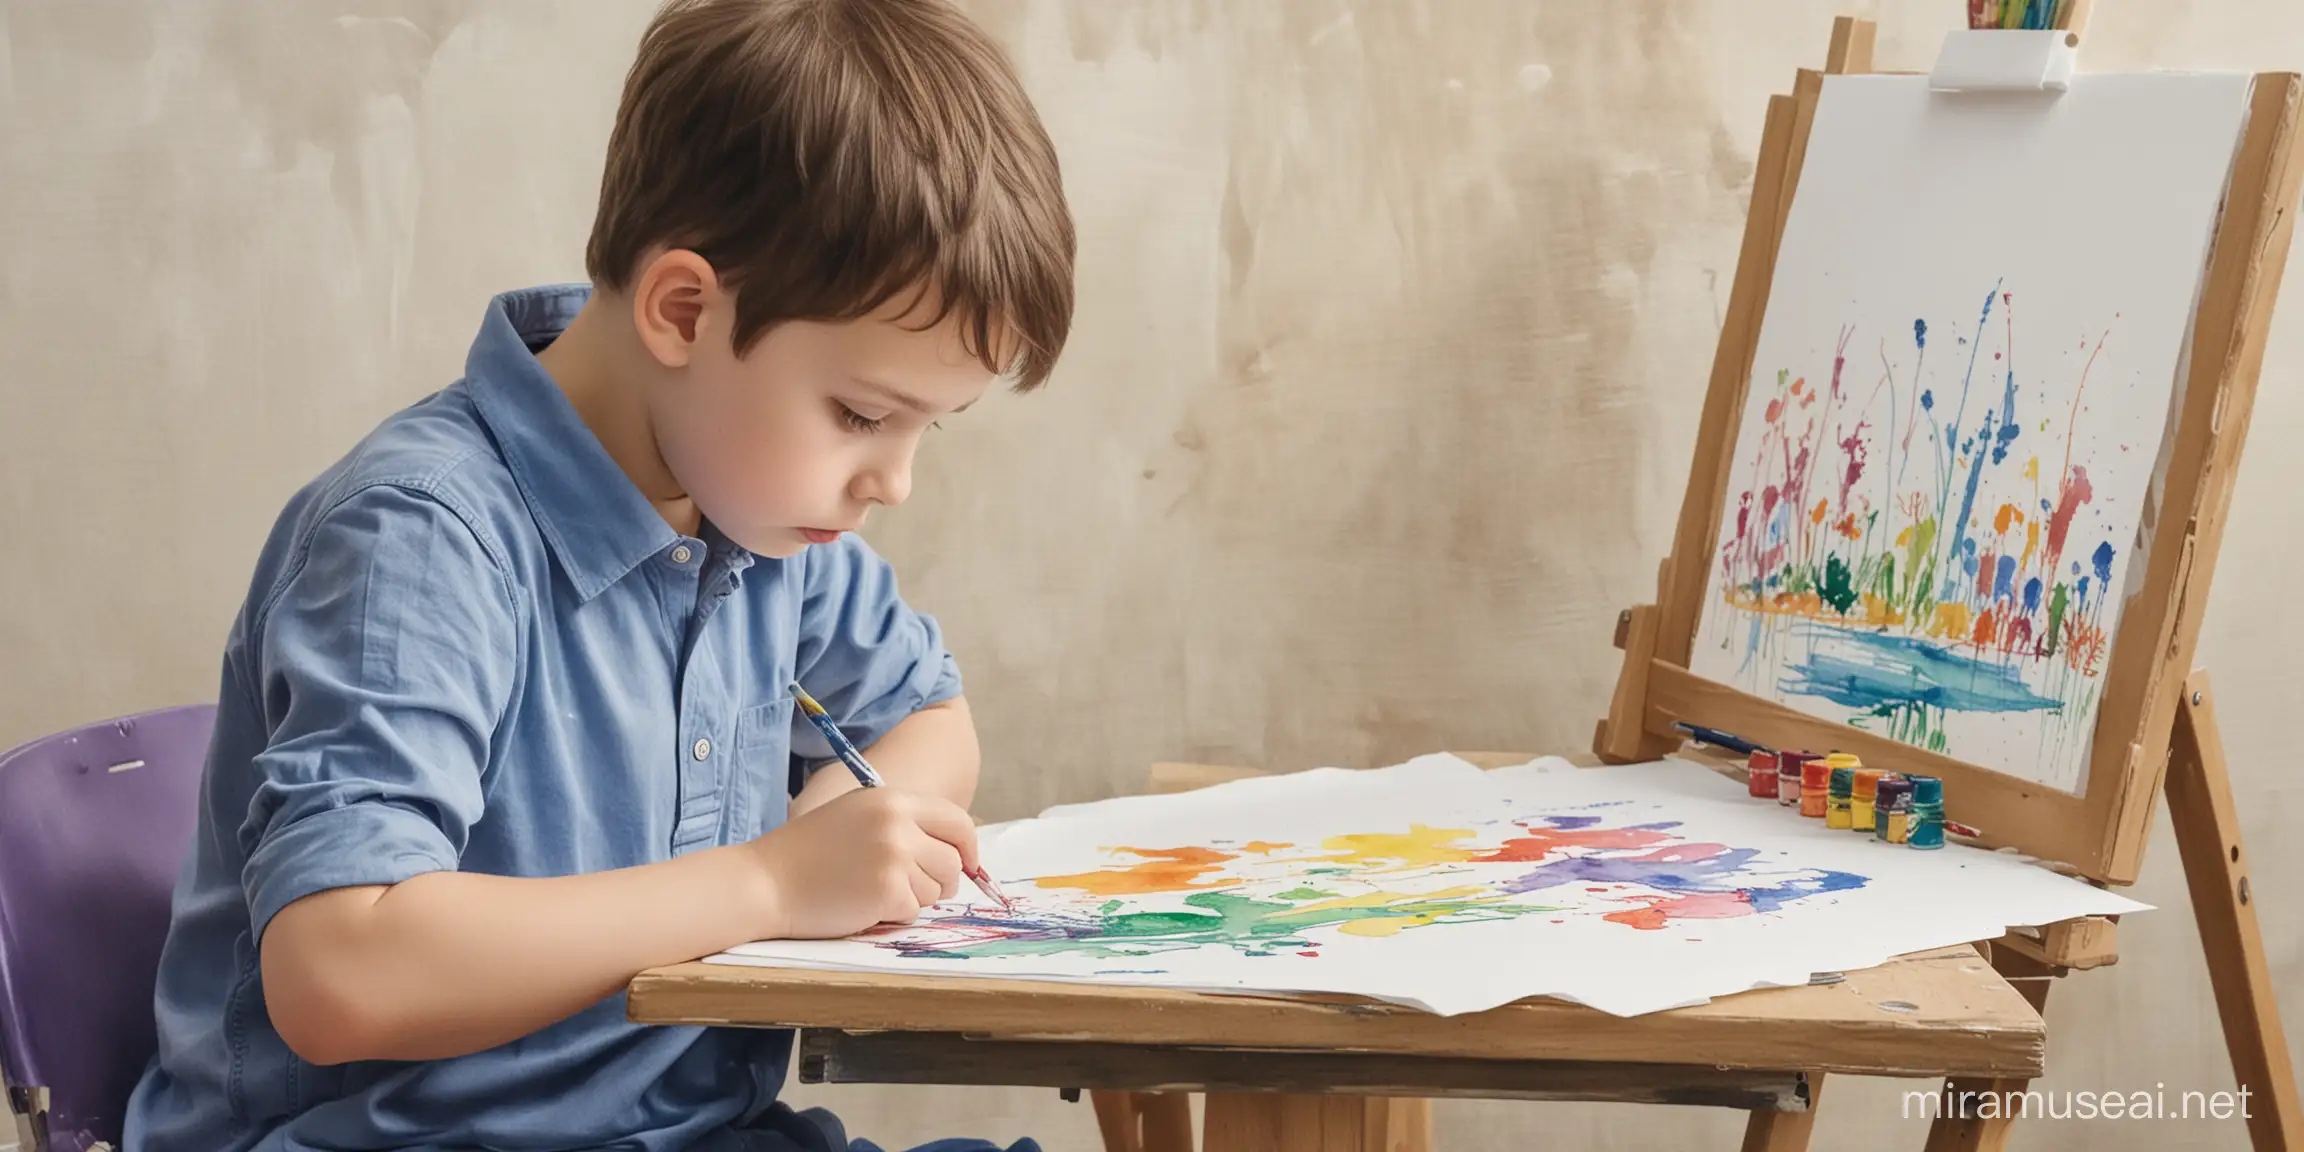 Autistic Kids Engaged in Expressive Watercolor Painting